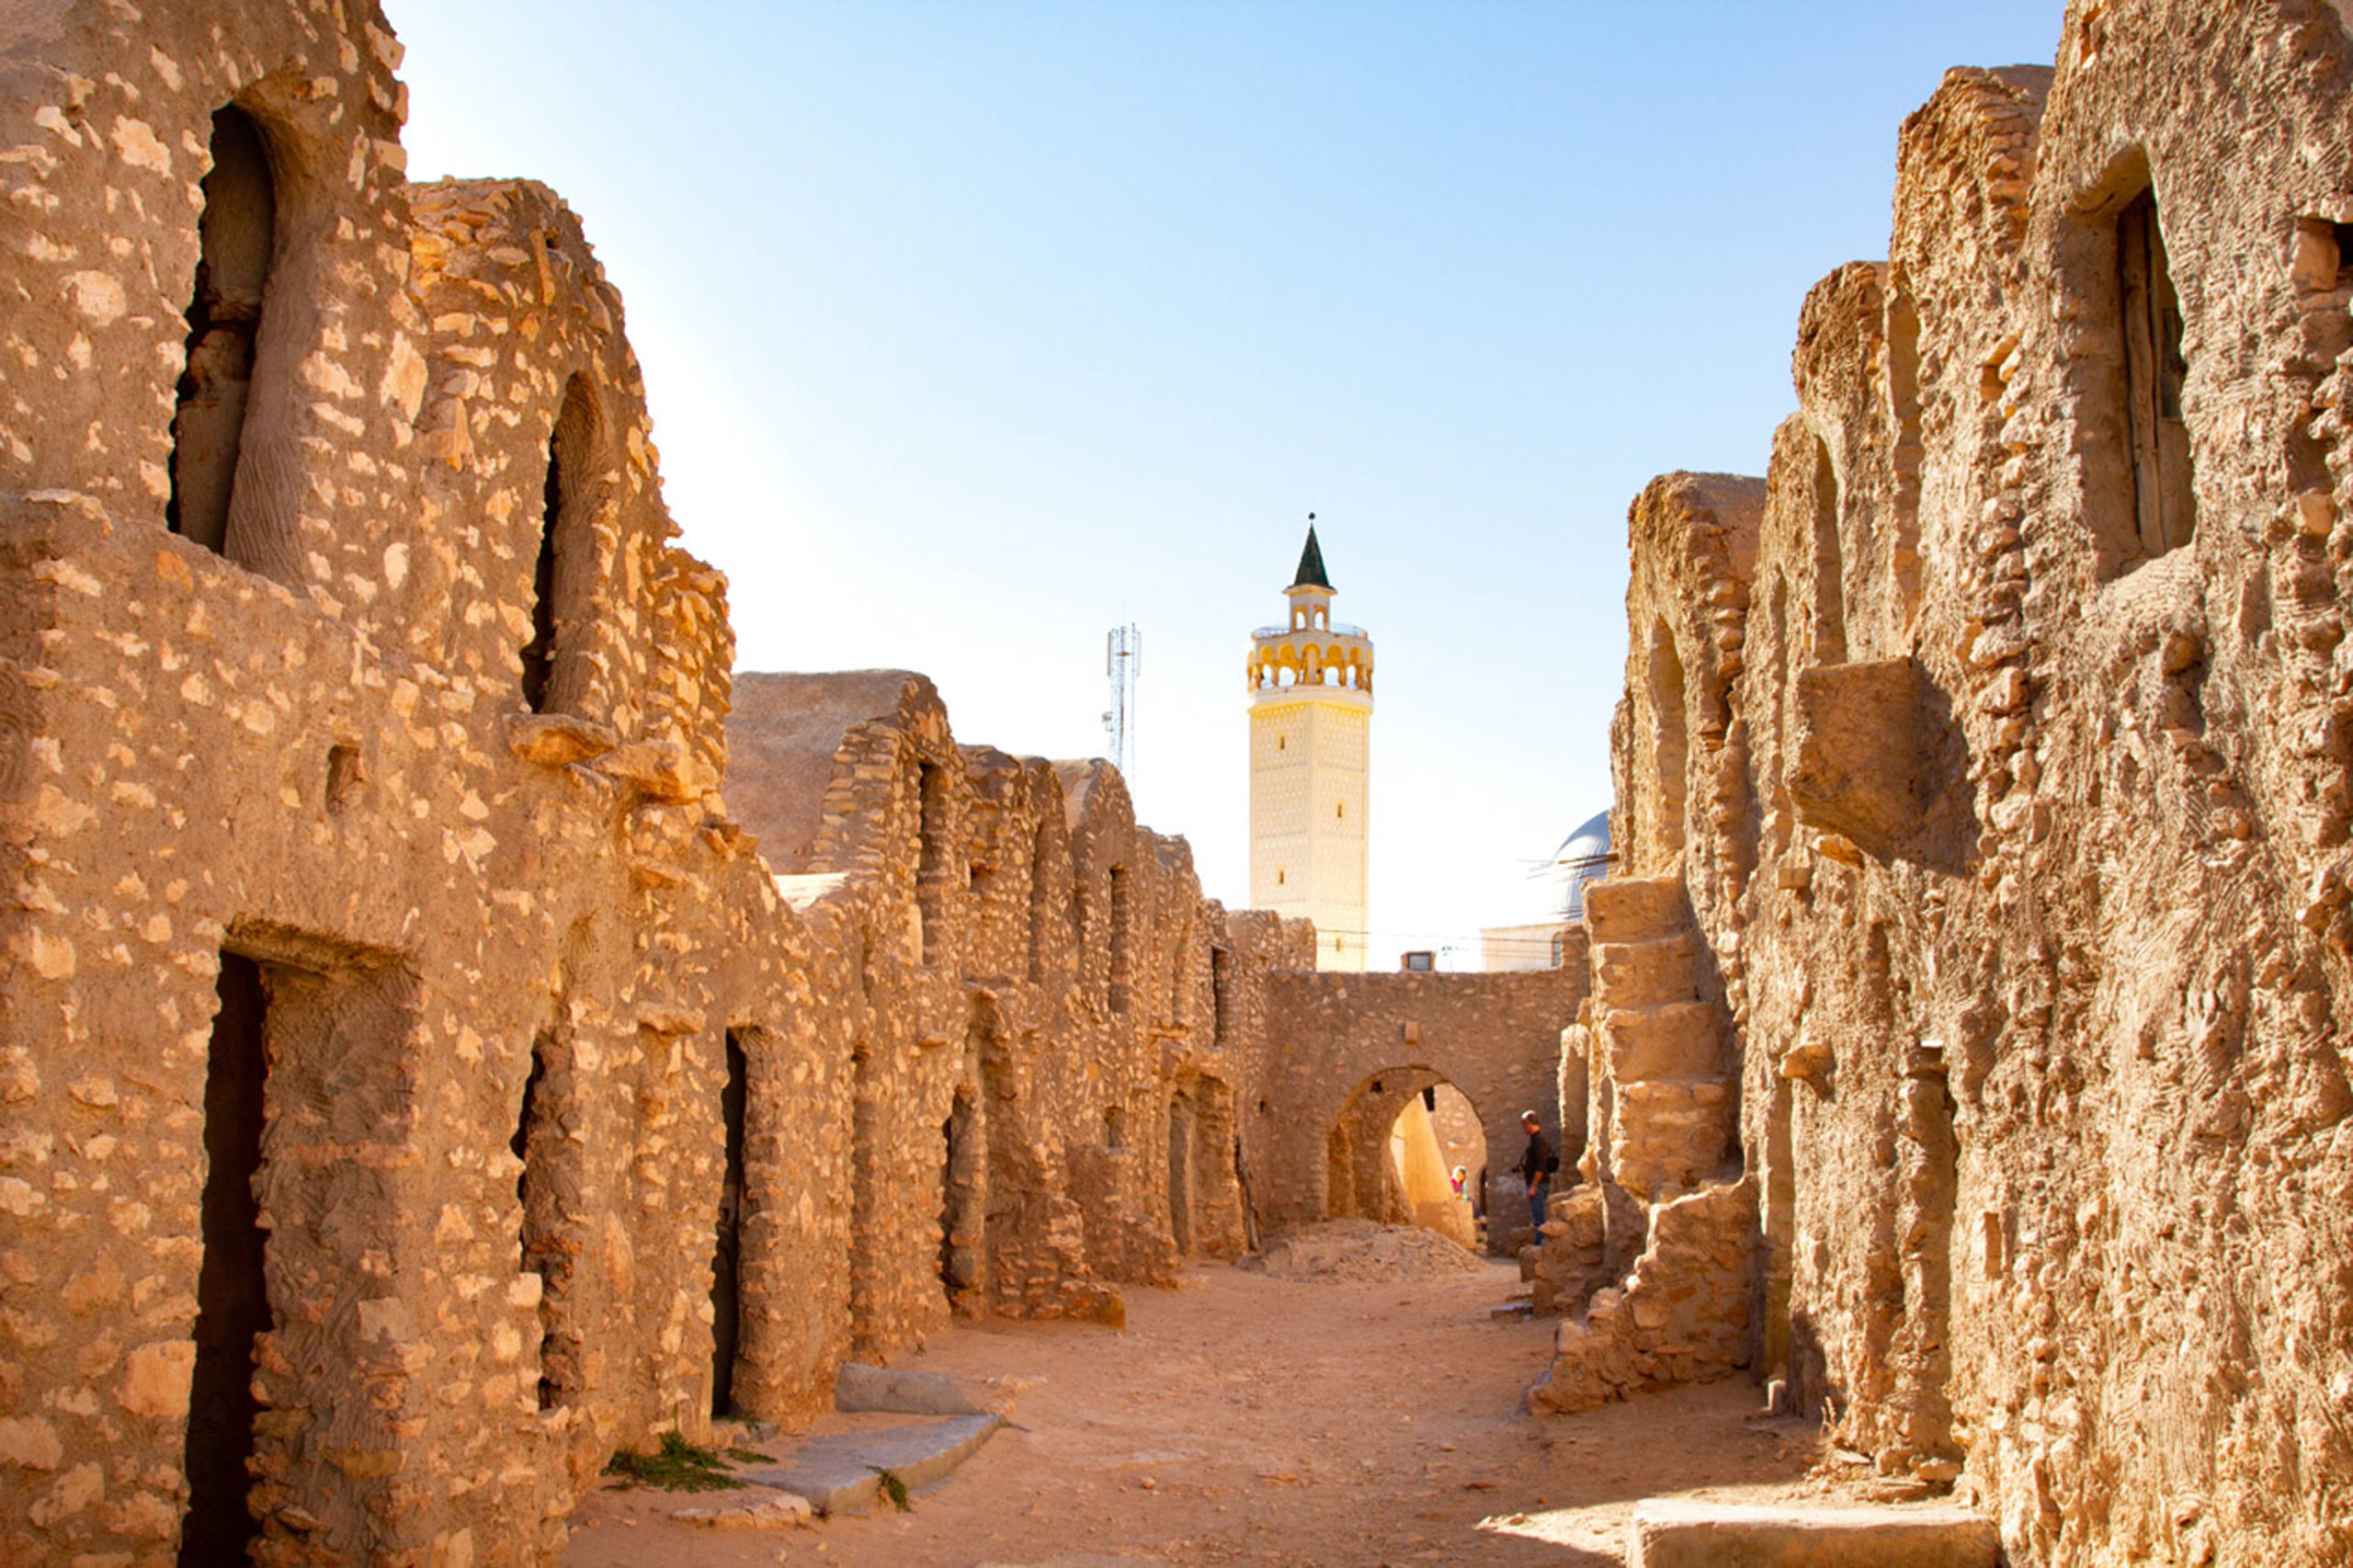 The town where Star Wars was filmed - Tatouine, is an obligatory stop on a road trip in Tunisia.